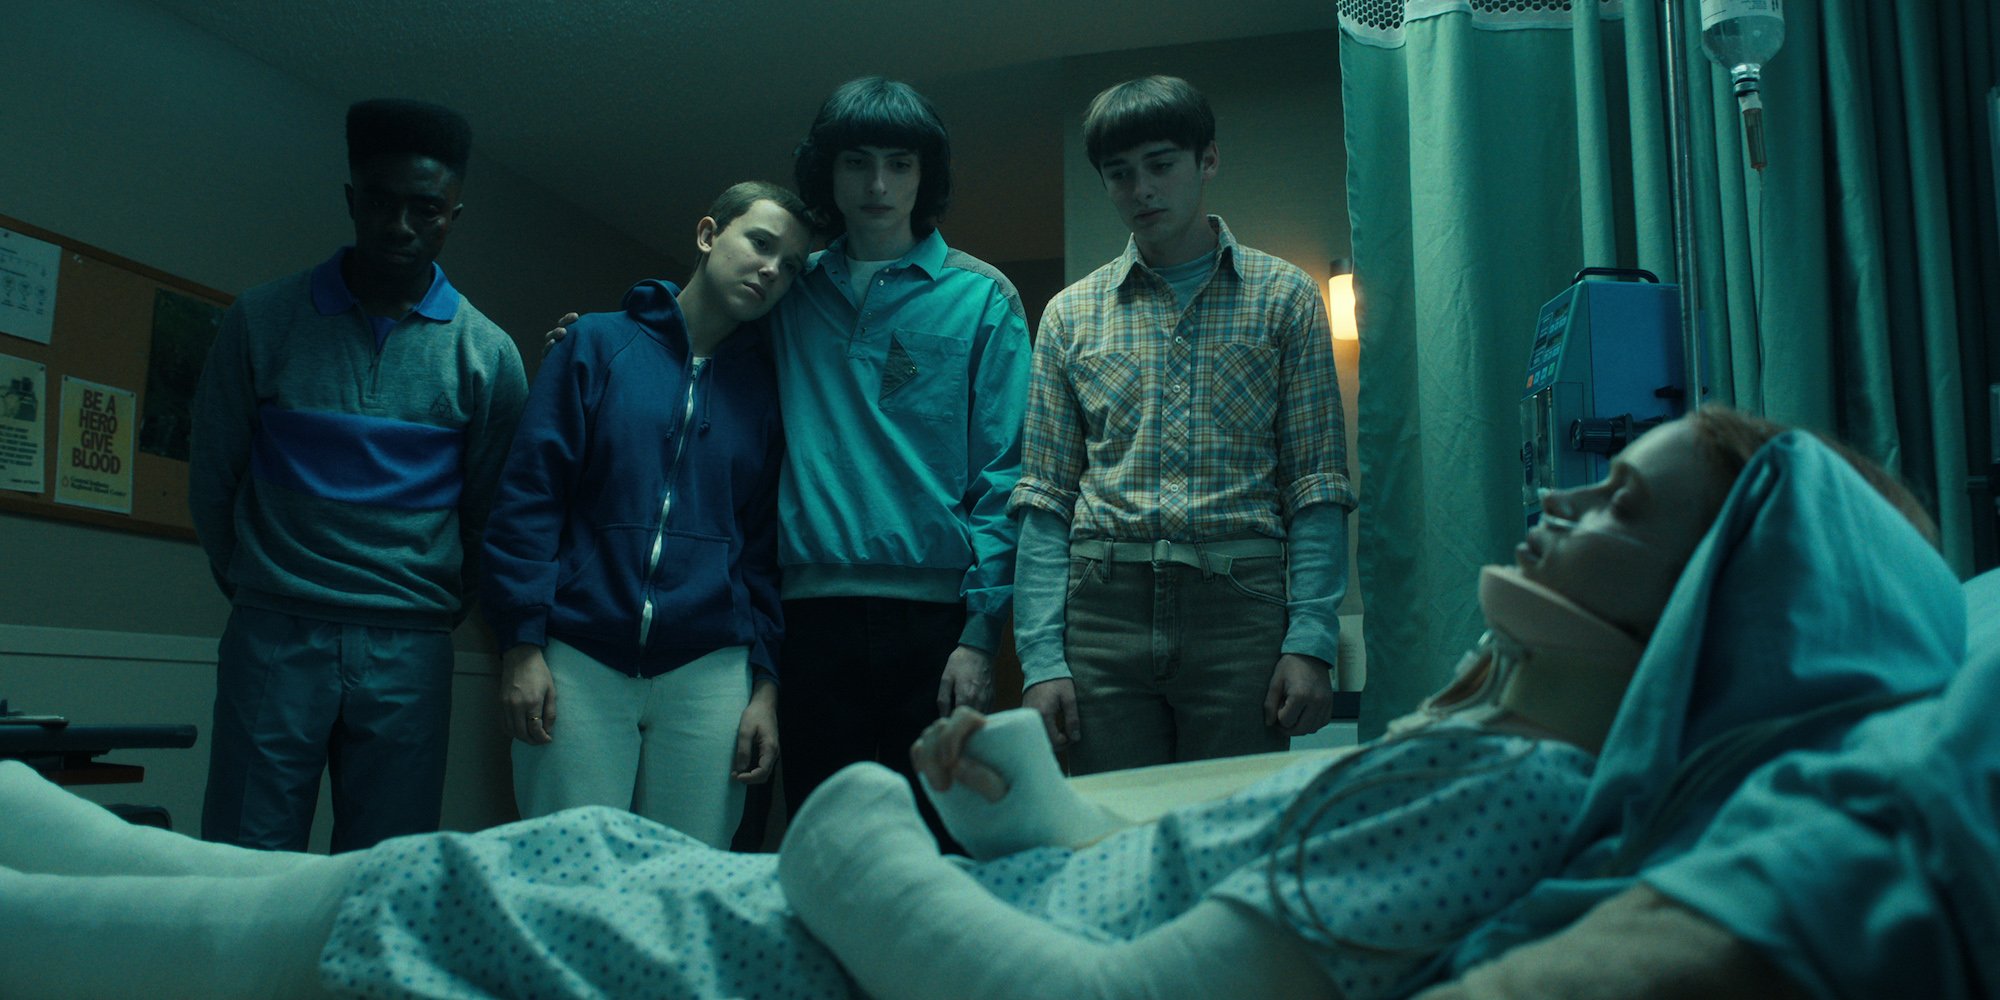 'Stranger Things' Season 4 ended with Max in a coma, seen here in a hospital bed. Here's everything the Duffer Brothers have said about 'Stranger Things' Season 5.